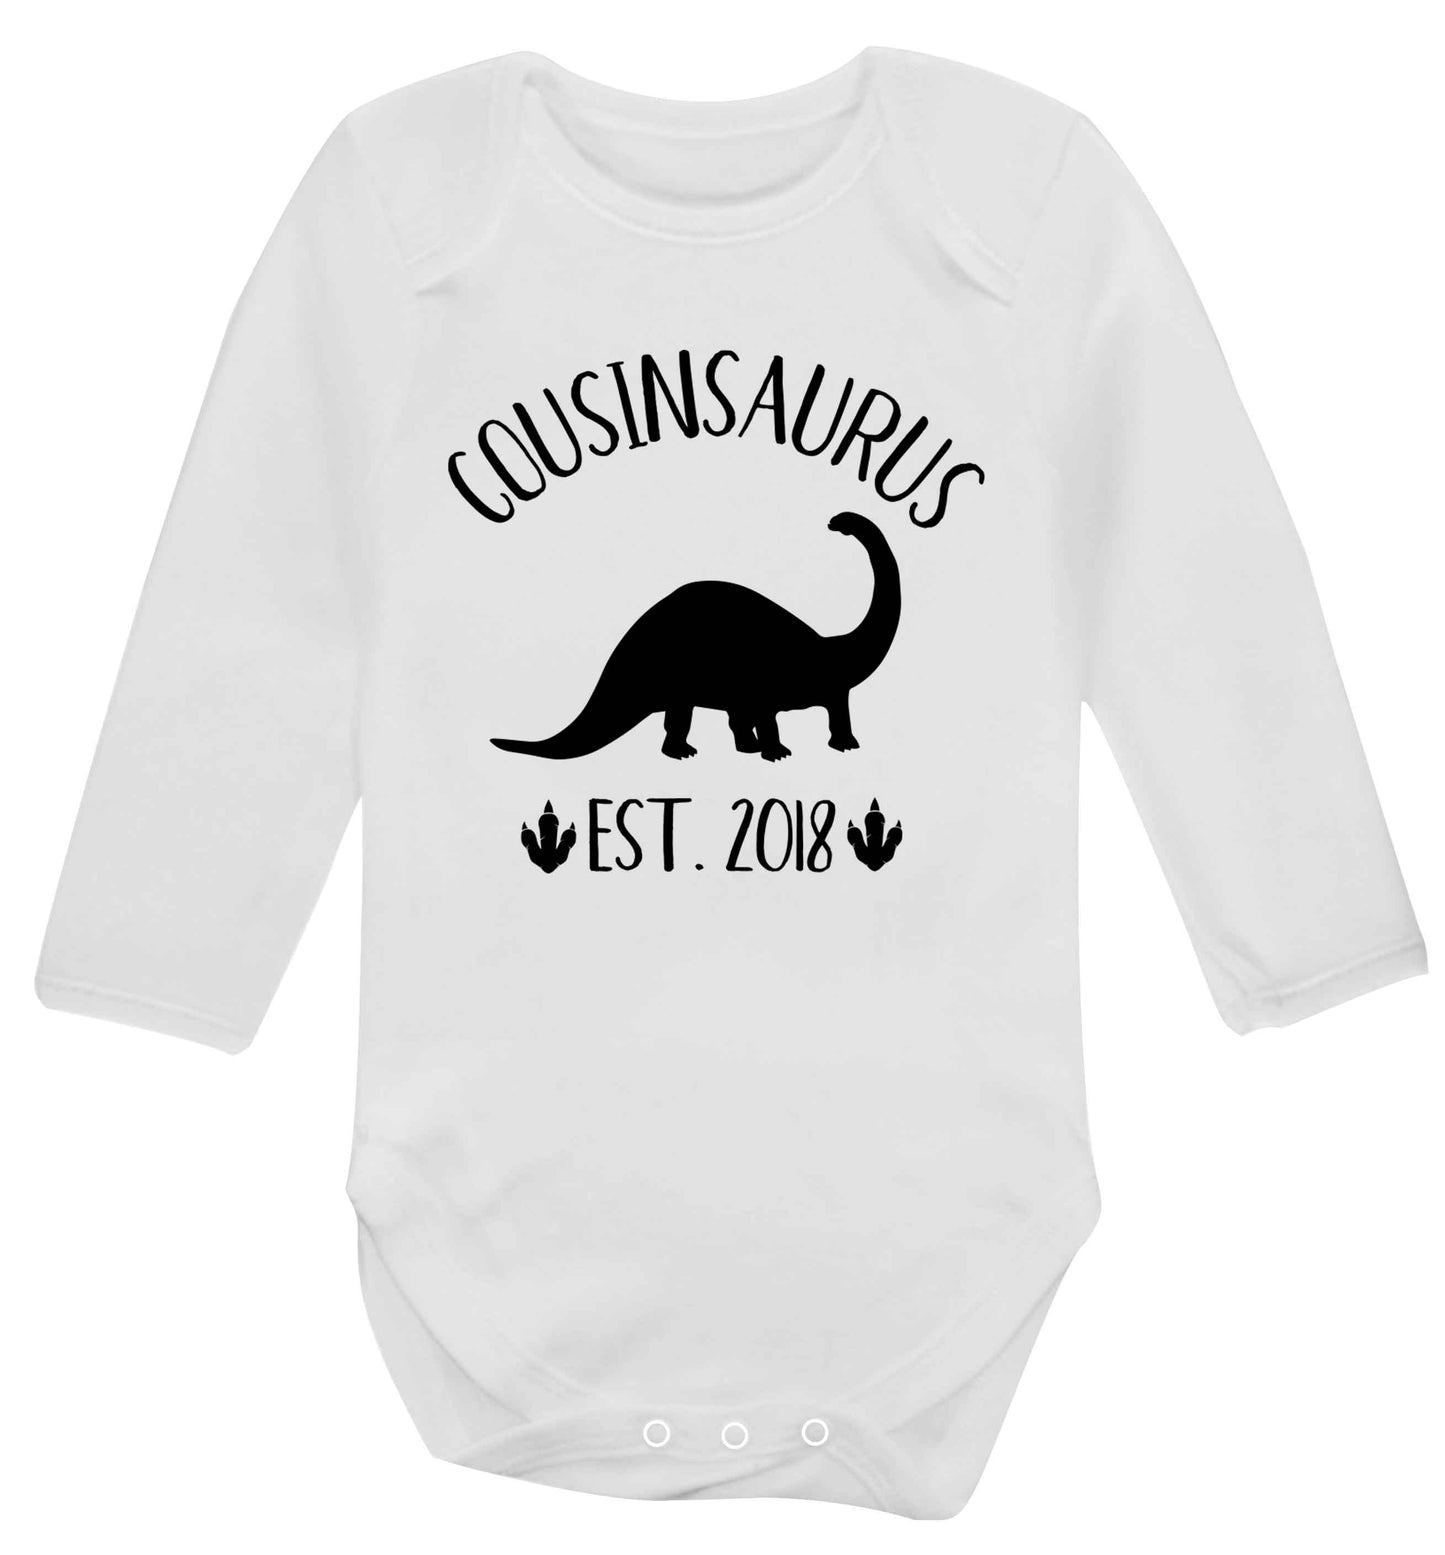 Personalised cousinsaurus since (custom date) Baby Vest long sleeved white 6-12 months